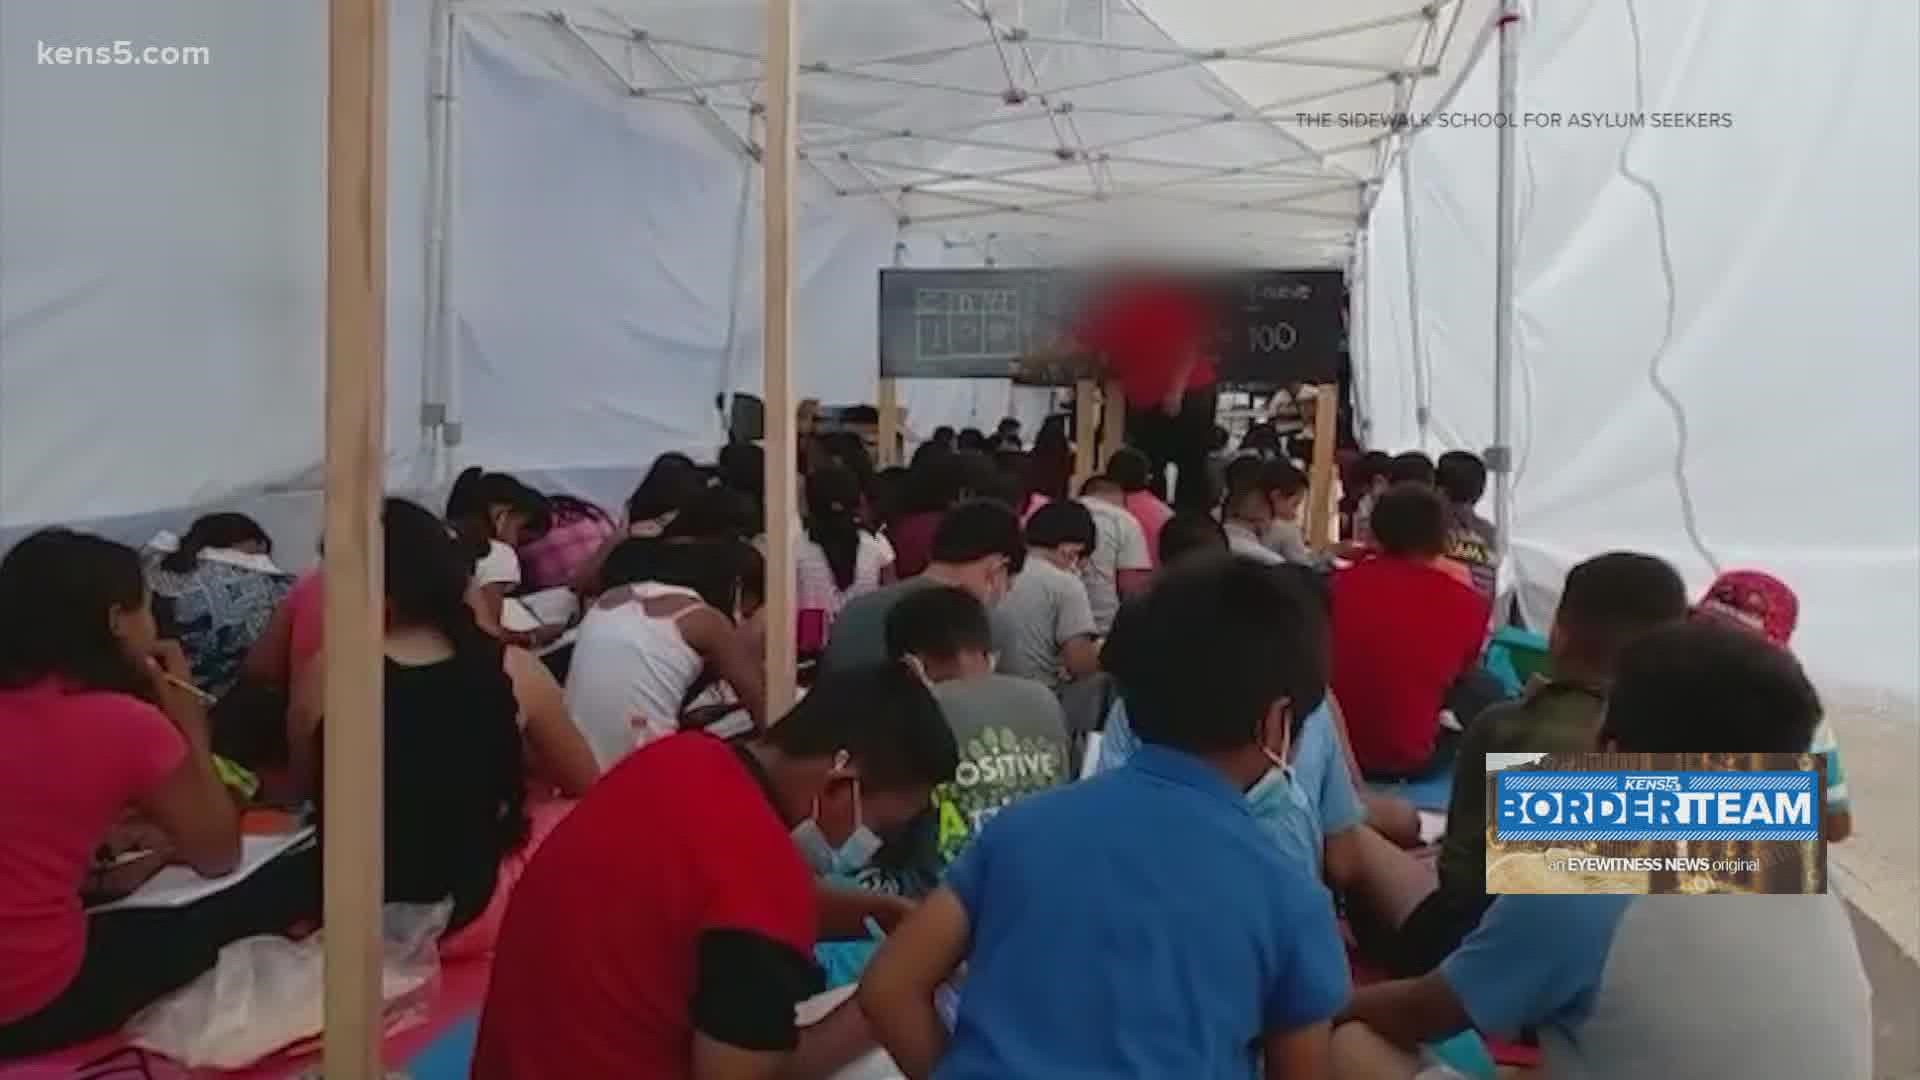 Thousands of migrants are staying in Mexico camps near the border, where they risk the threat of kidnappings or worse.